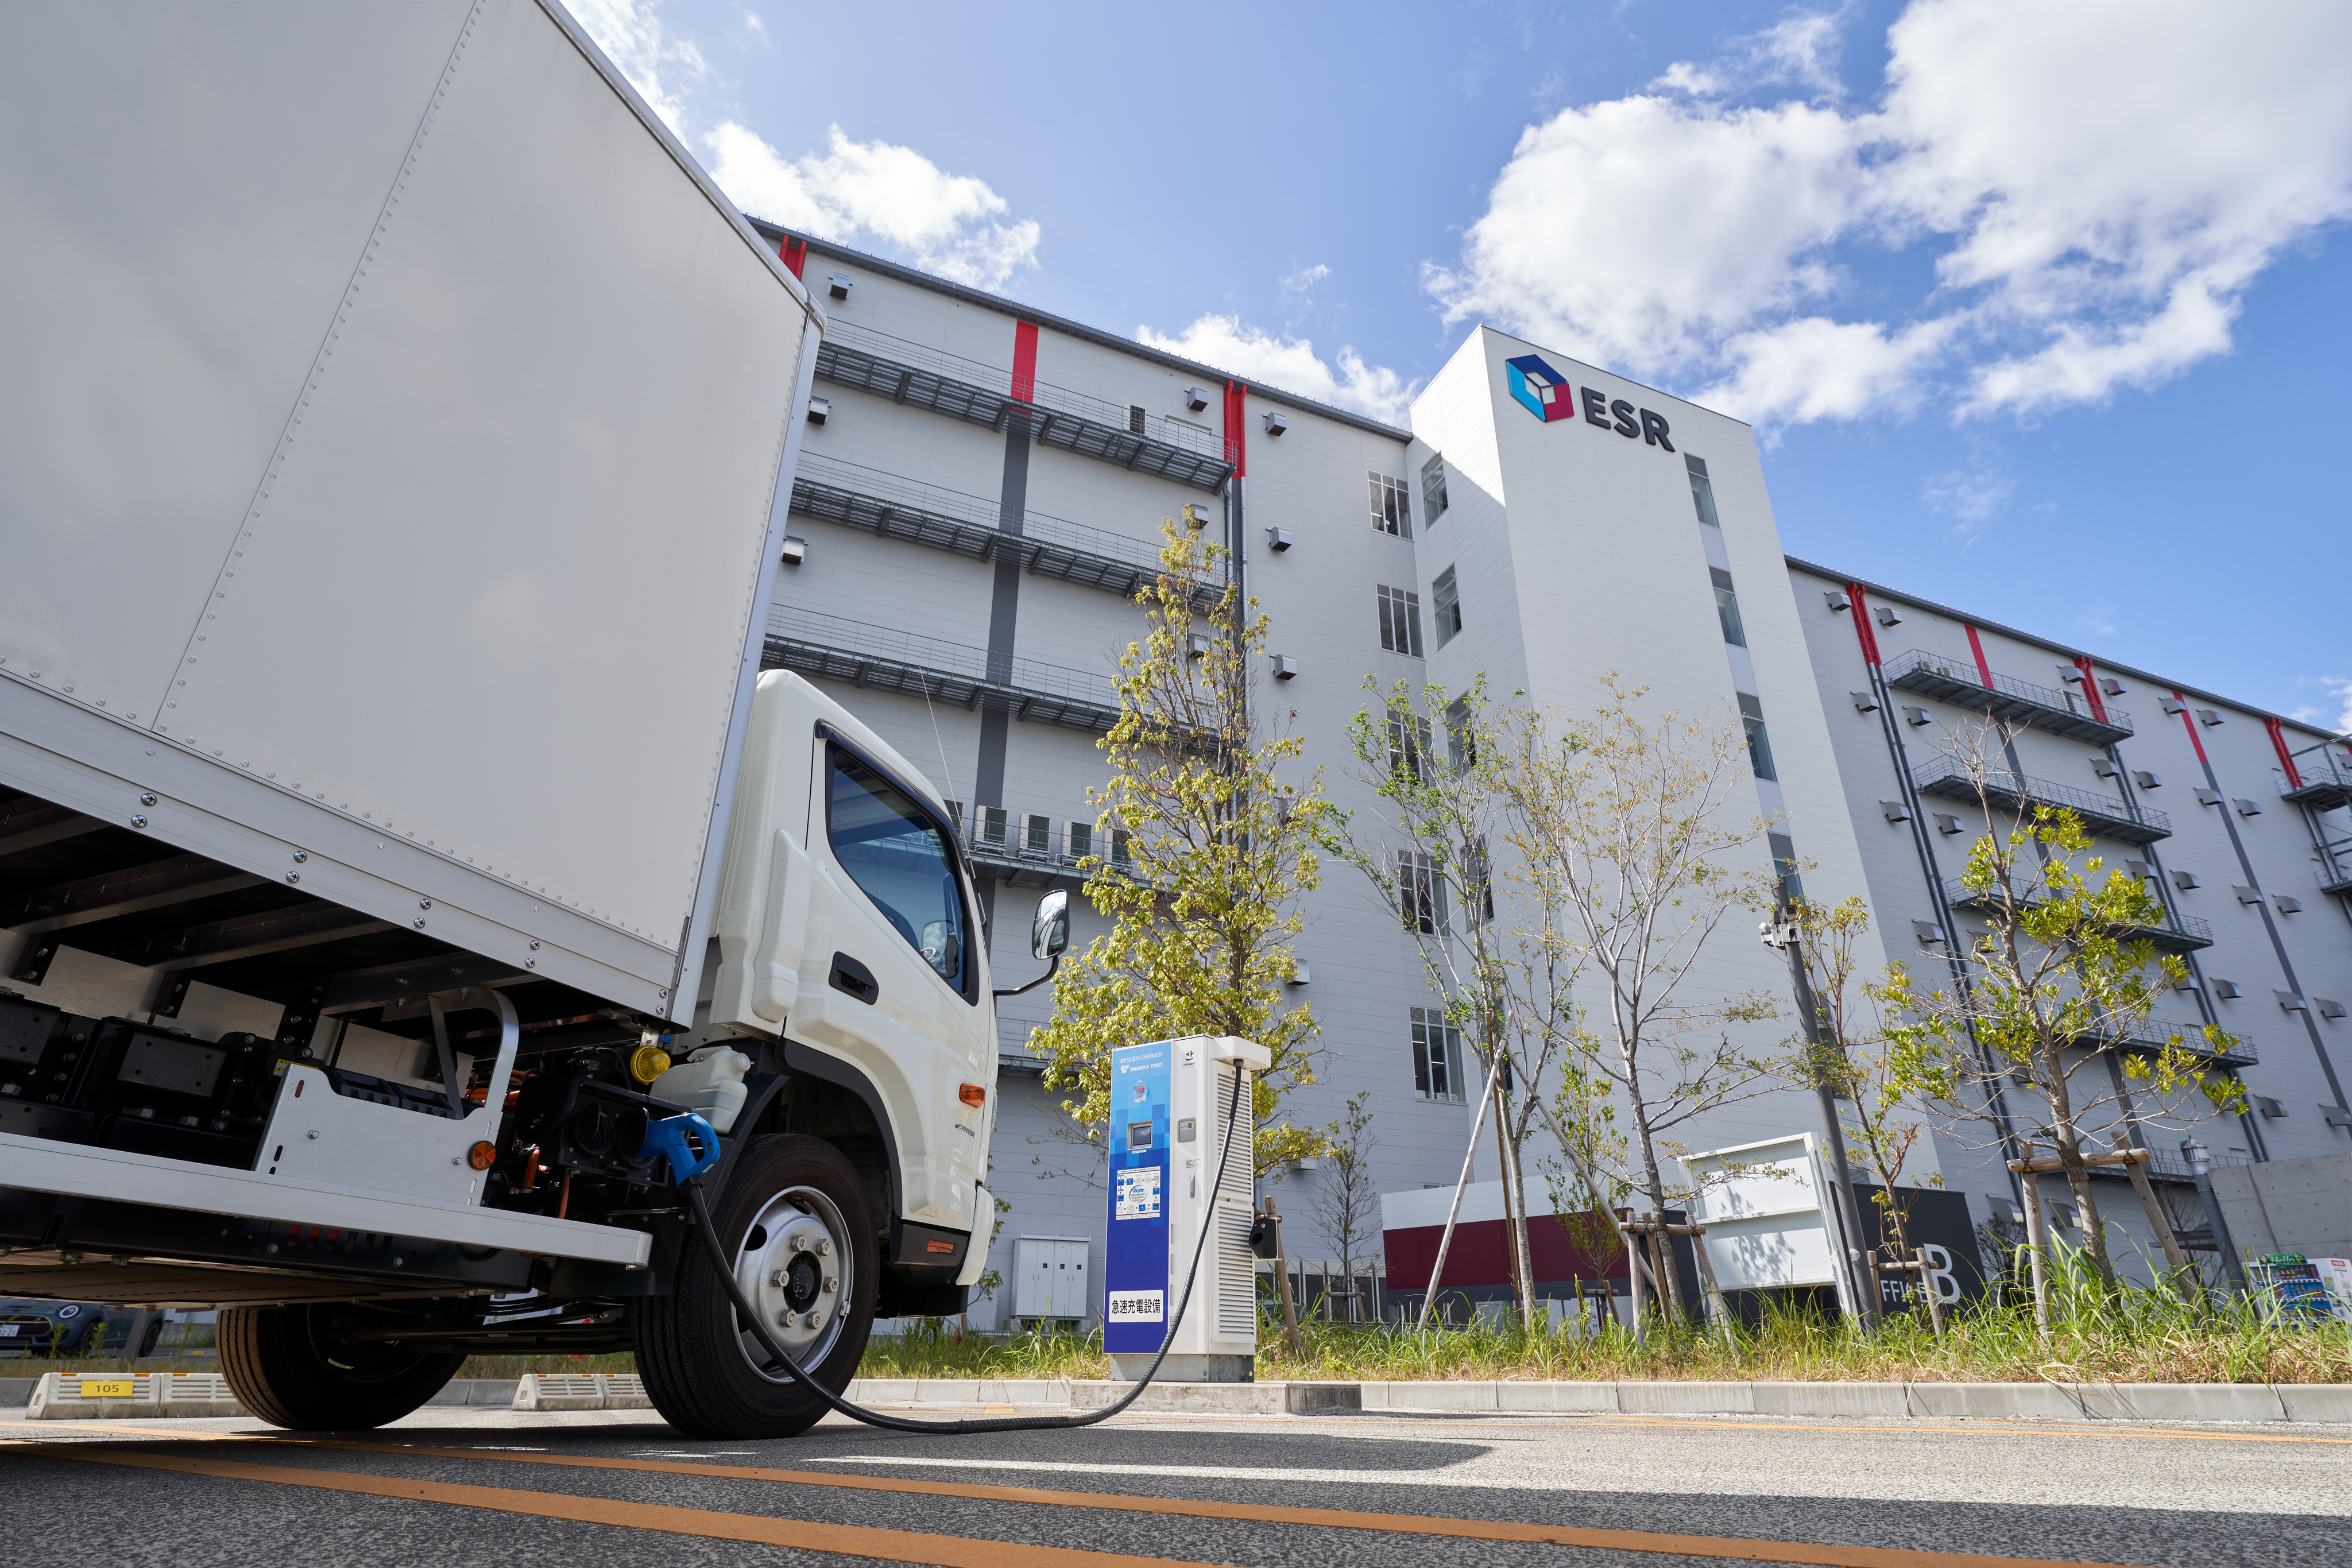 mftbc-and-dtfsa-to-partner-with-esr-to-promote-carbon-neutral-logistics